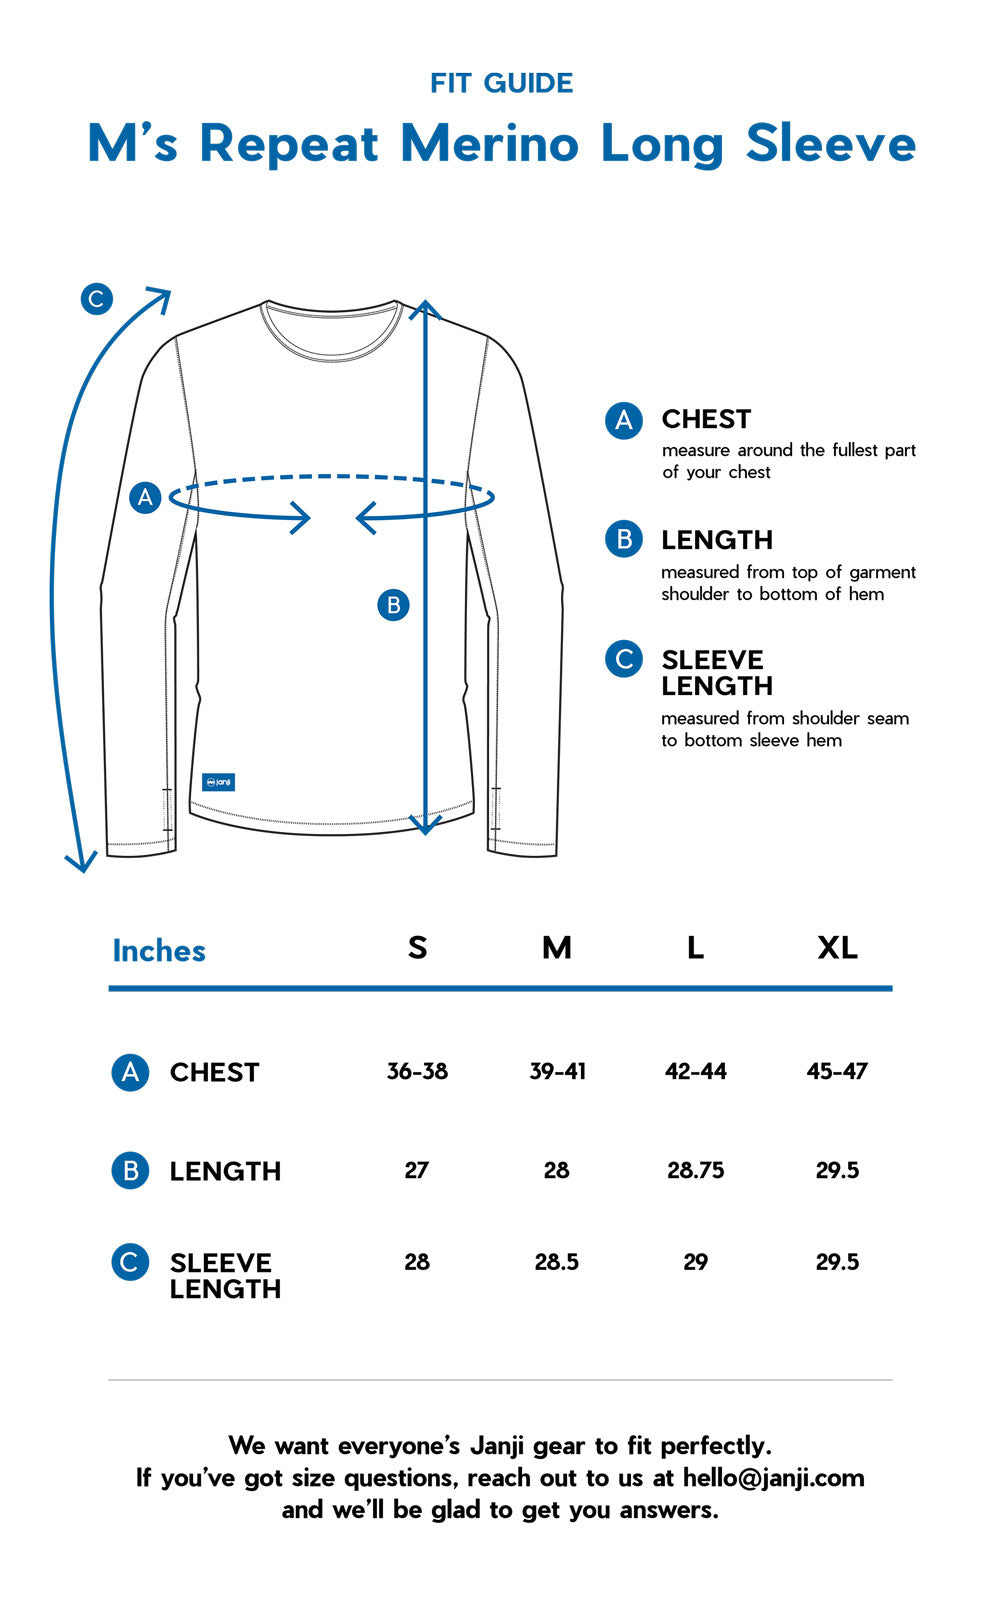 M's Repeat Merino Long Sleeve size guide